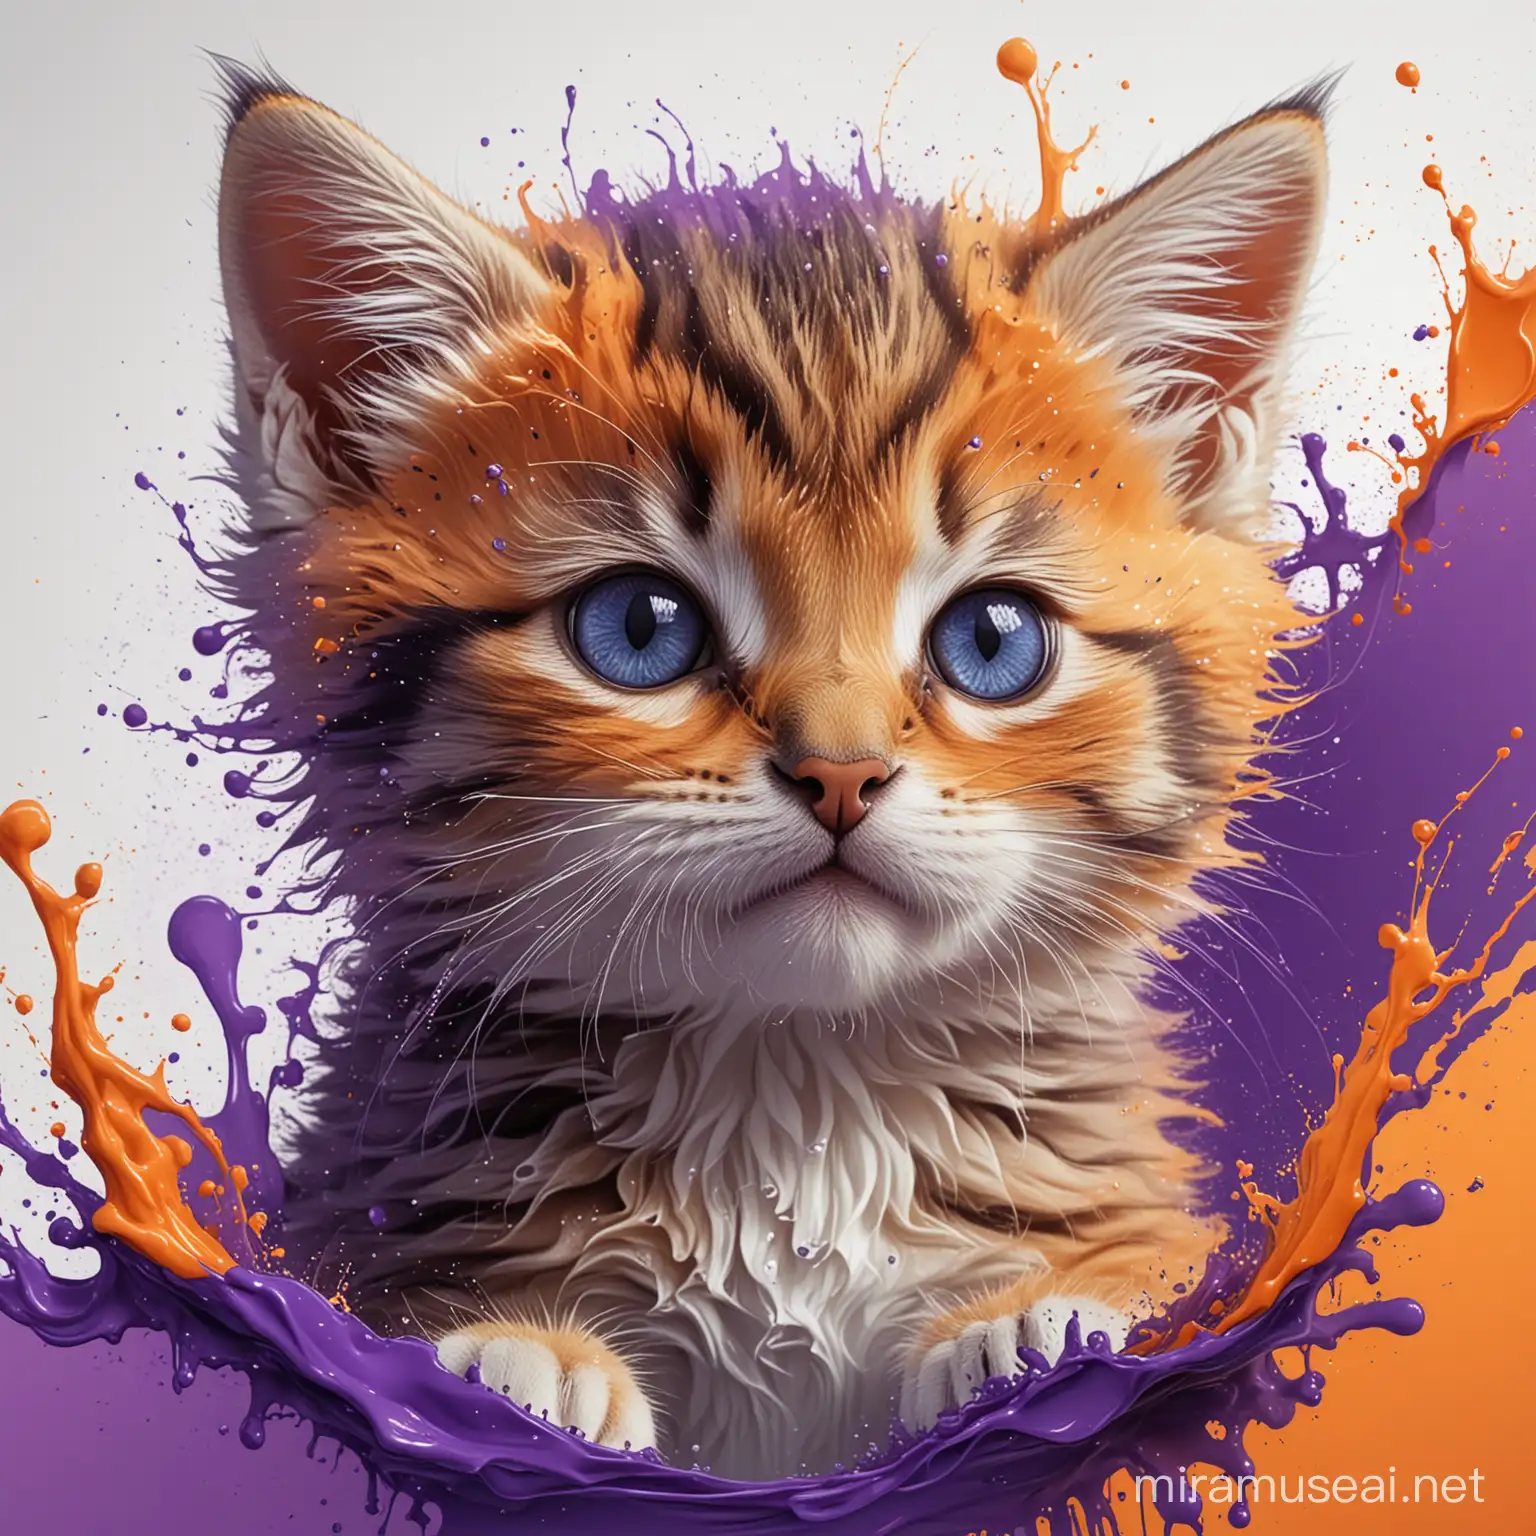 Adorable Kitten in Hyperdetailed TeeShirt with Vibrant Gradient and Color Splash